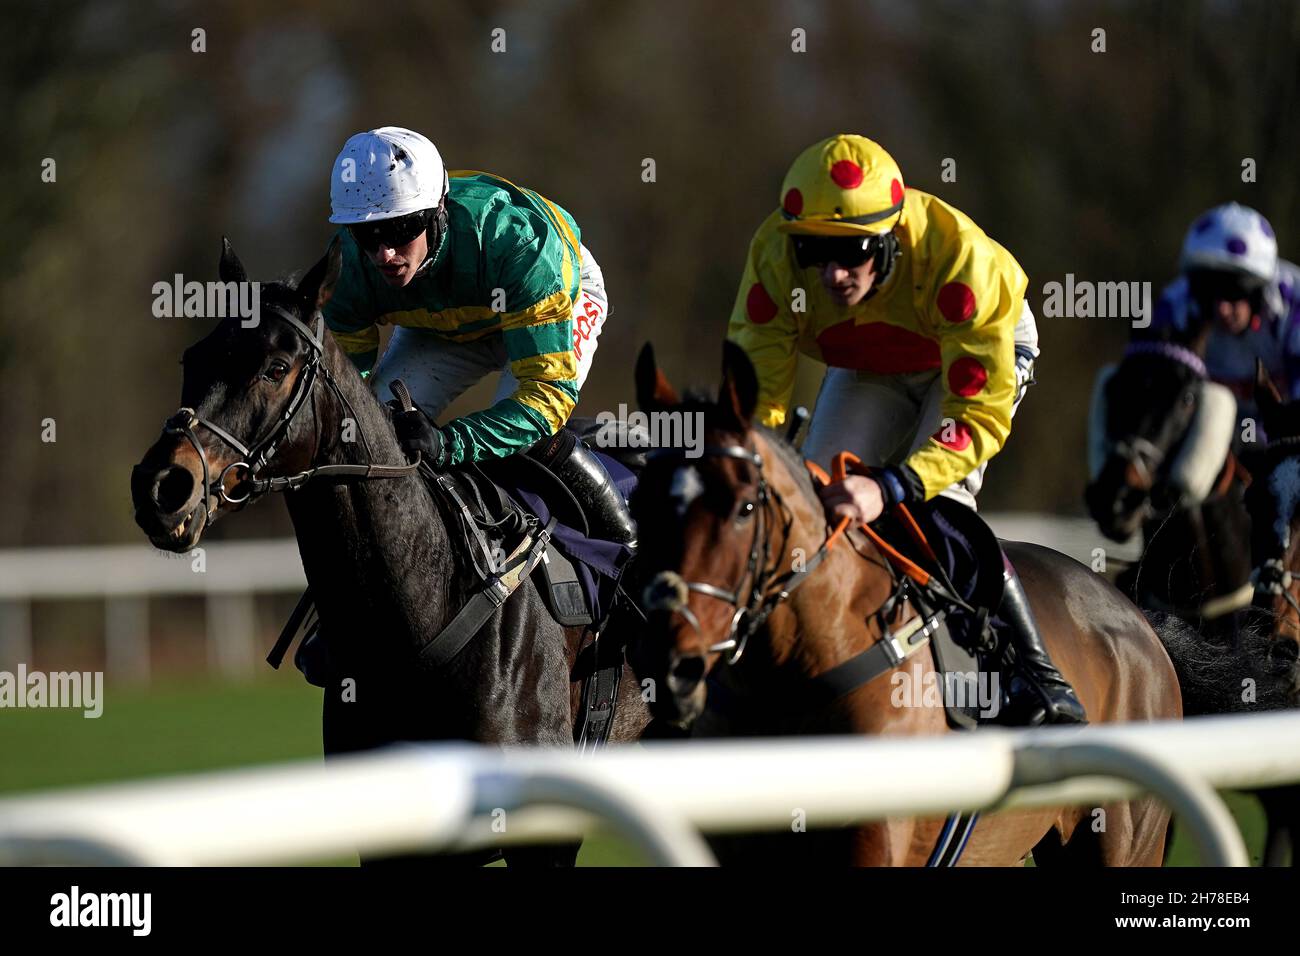 Geordie Des Champs ridden by jockey Adam Wedge (left) on their way to winning the National Hunt Racing Enthusiasts Club Handicap Hurdle with Taste The Fear ridden by jockey Sam Twiston-Davies third at Uttoxeter Racecourse, Staffordshire. Picture date: Sunday November 21, 2021. Stock Photo